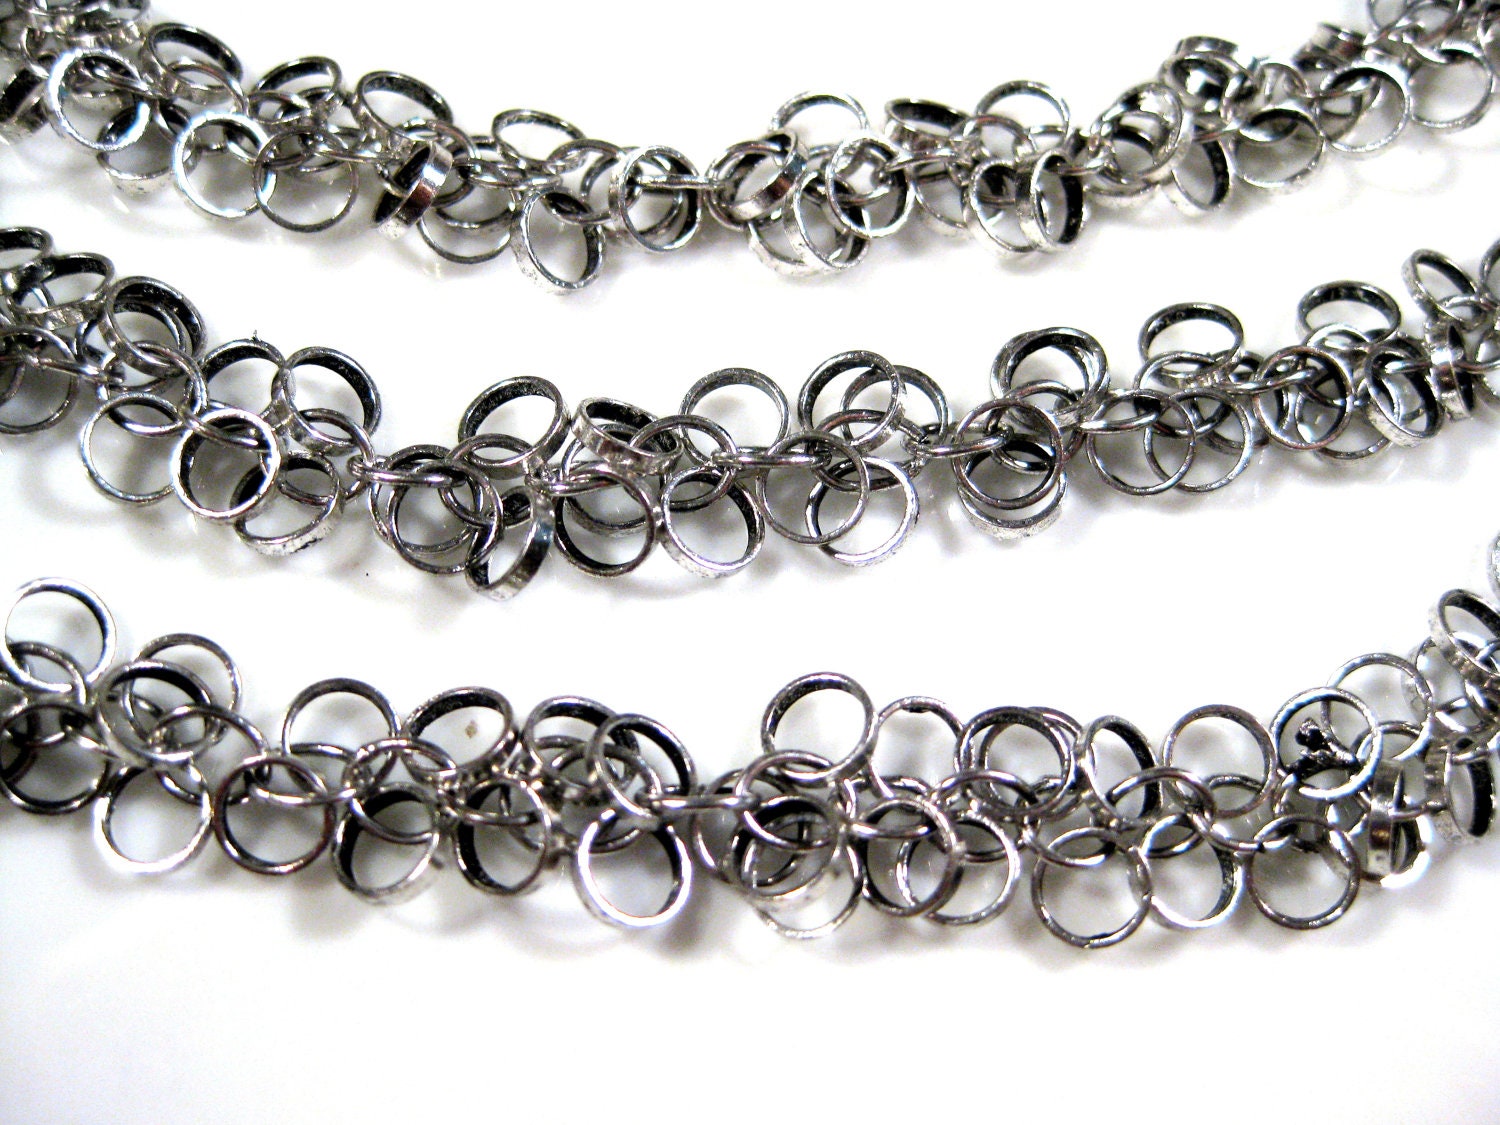 Antique Silver Multi Loop chain with 2 extra loops per link by